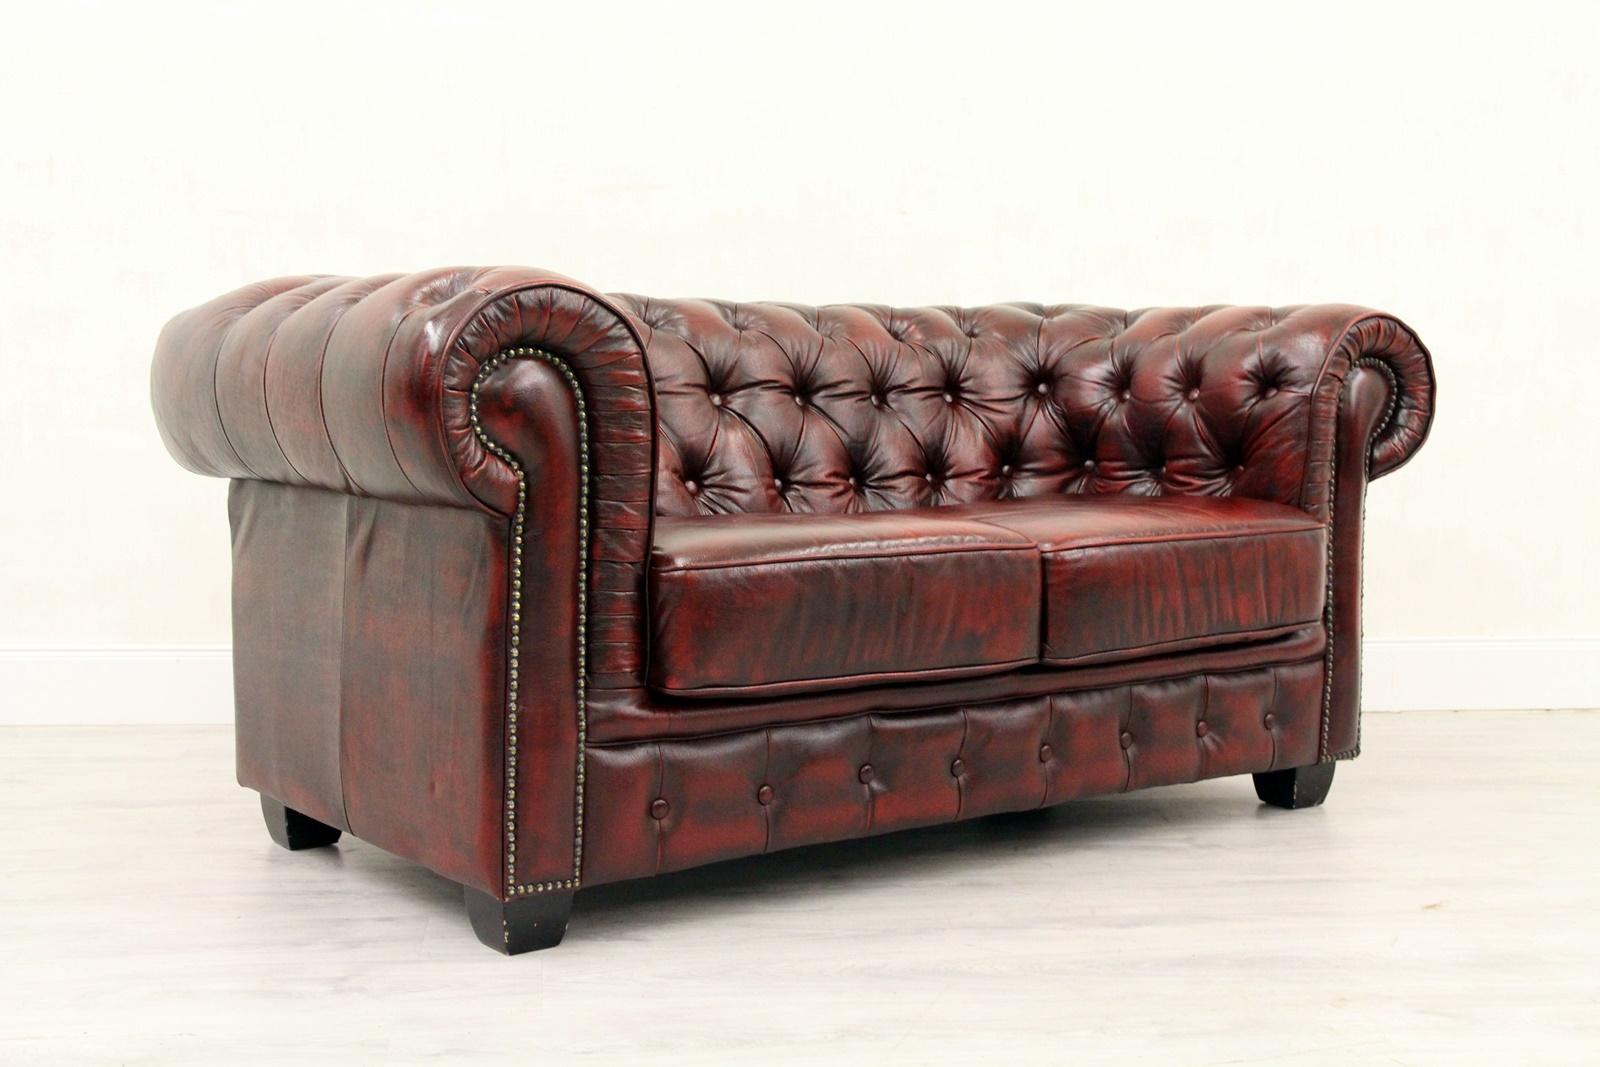 Chesterfield English Sofa Leather Antique Vintage Couch Chippendale im Angebot 4